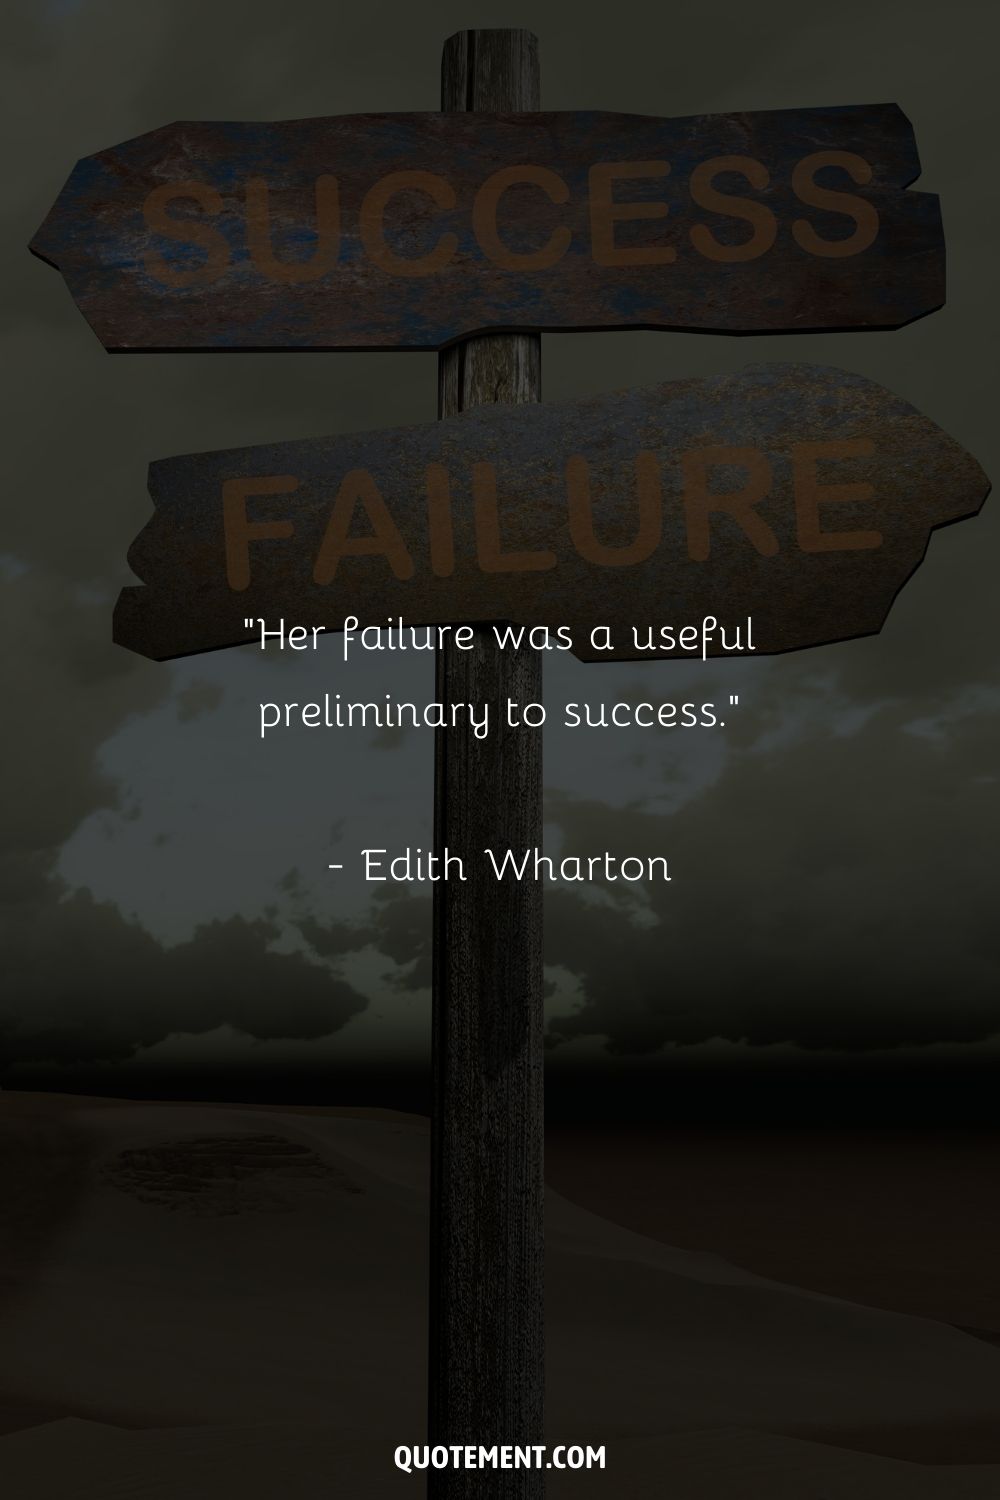 “Her failure was a useful preliminary to success.” ― Edith Wharton, The Custom of the Country